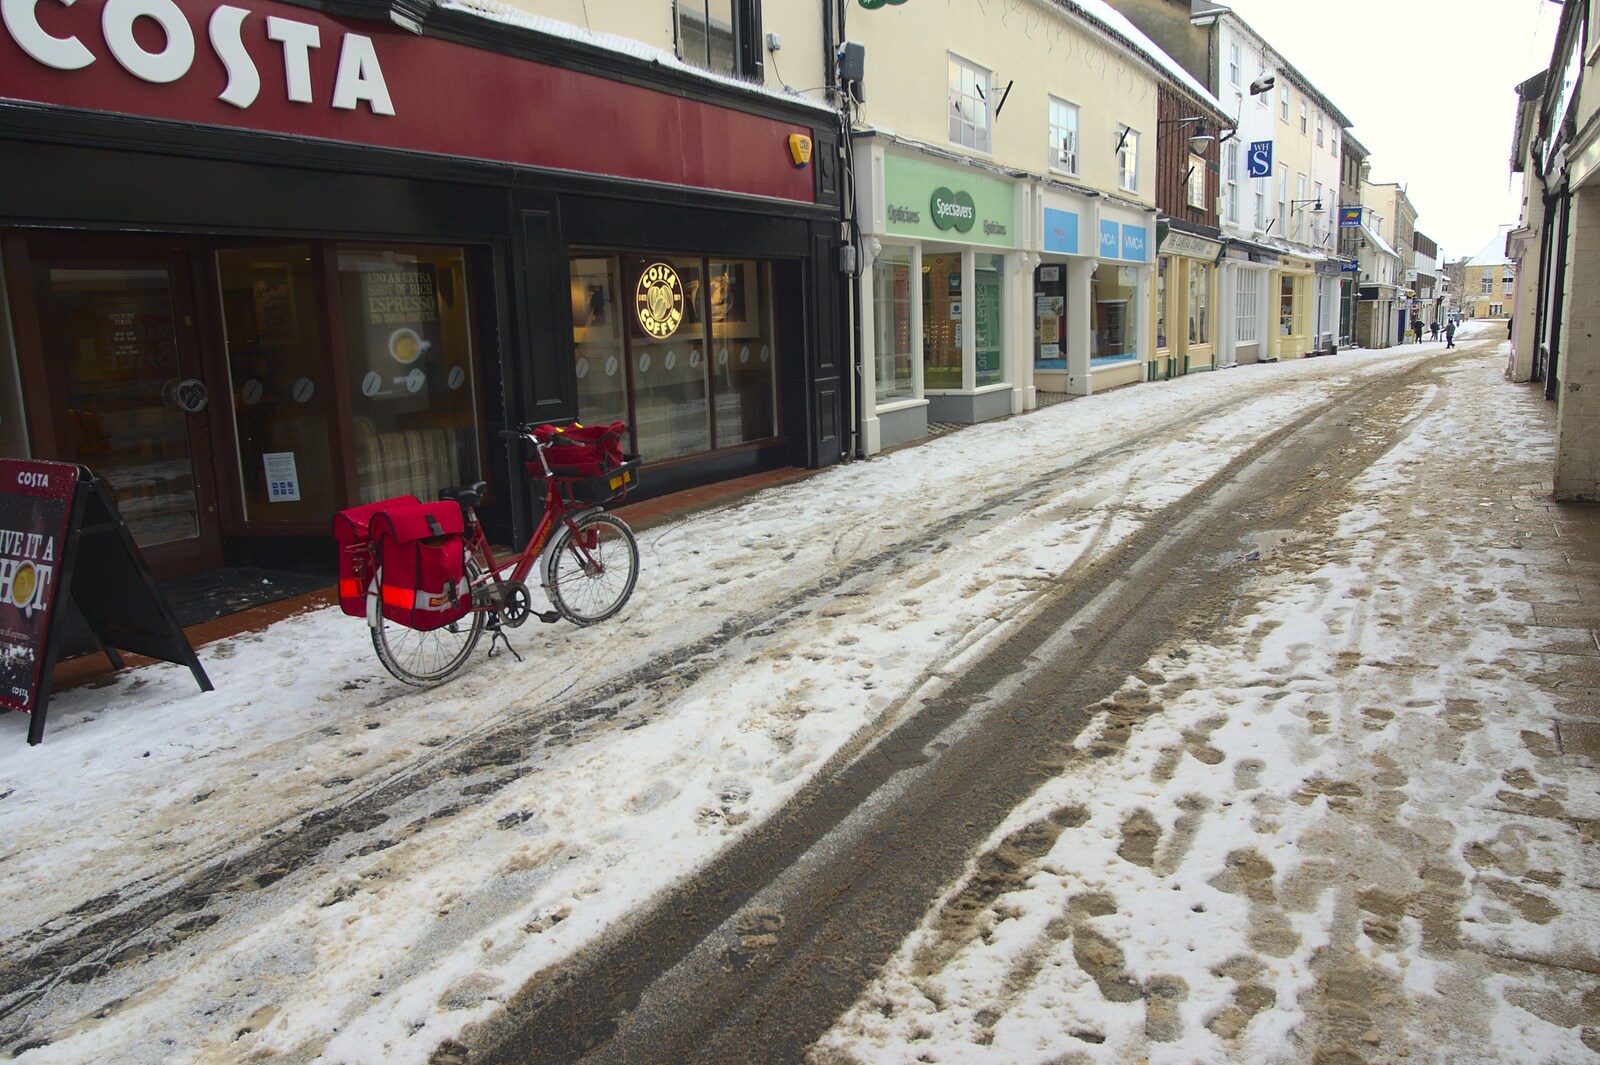 A Snowy Miscellany, Diss, Norfolk - 9th January 2010: The Postie's bike outside Costa